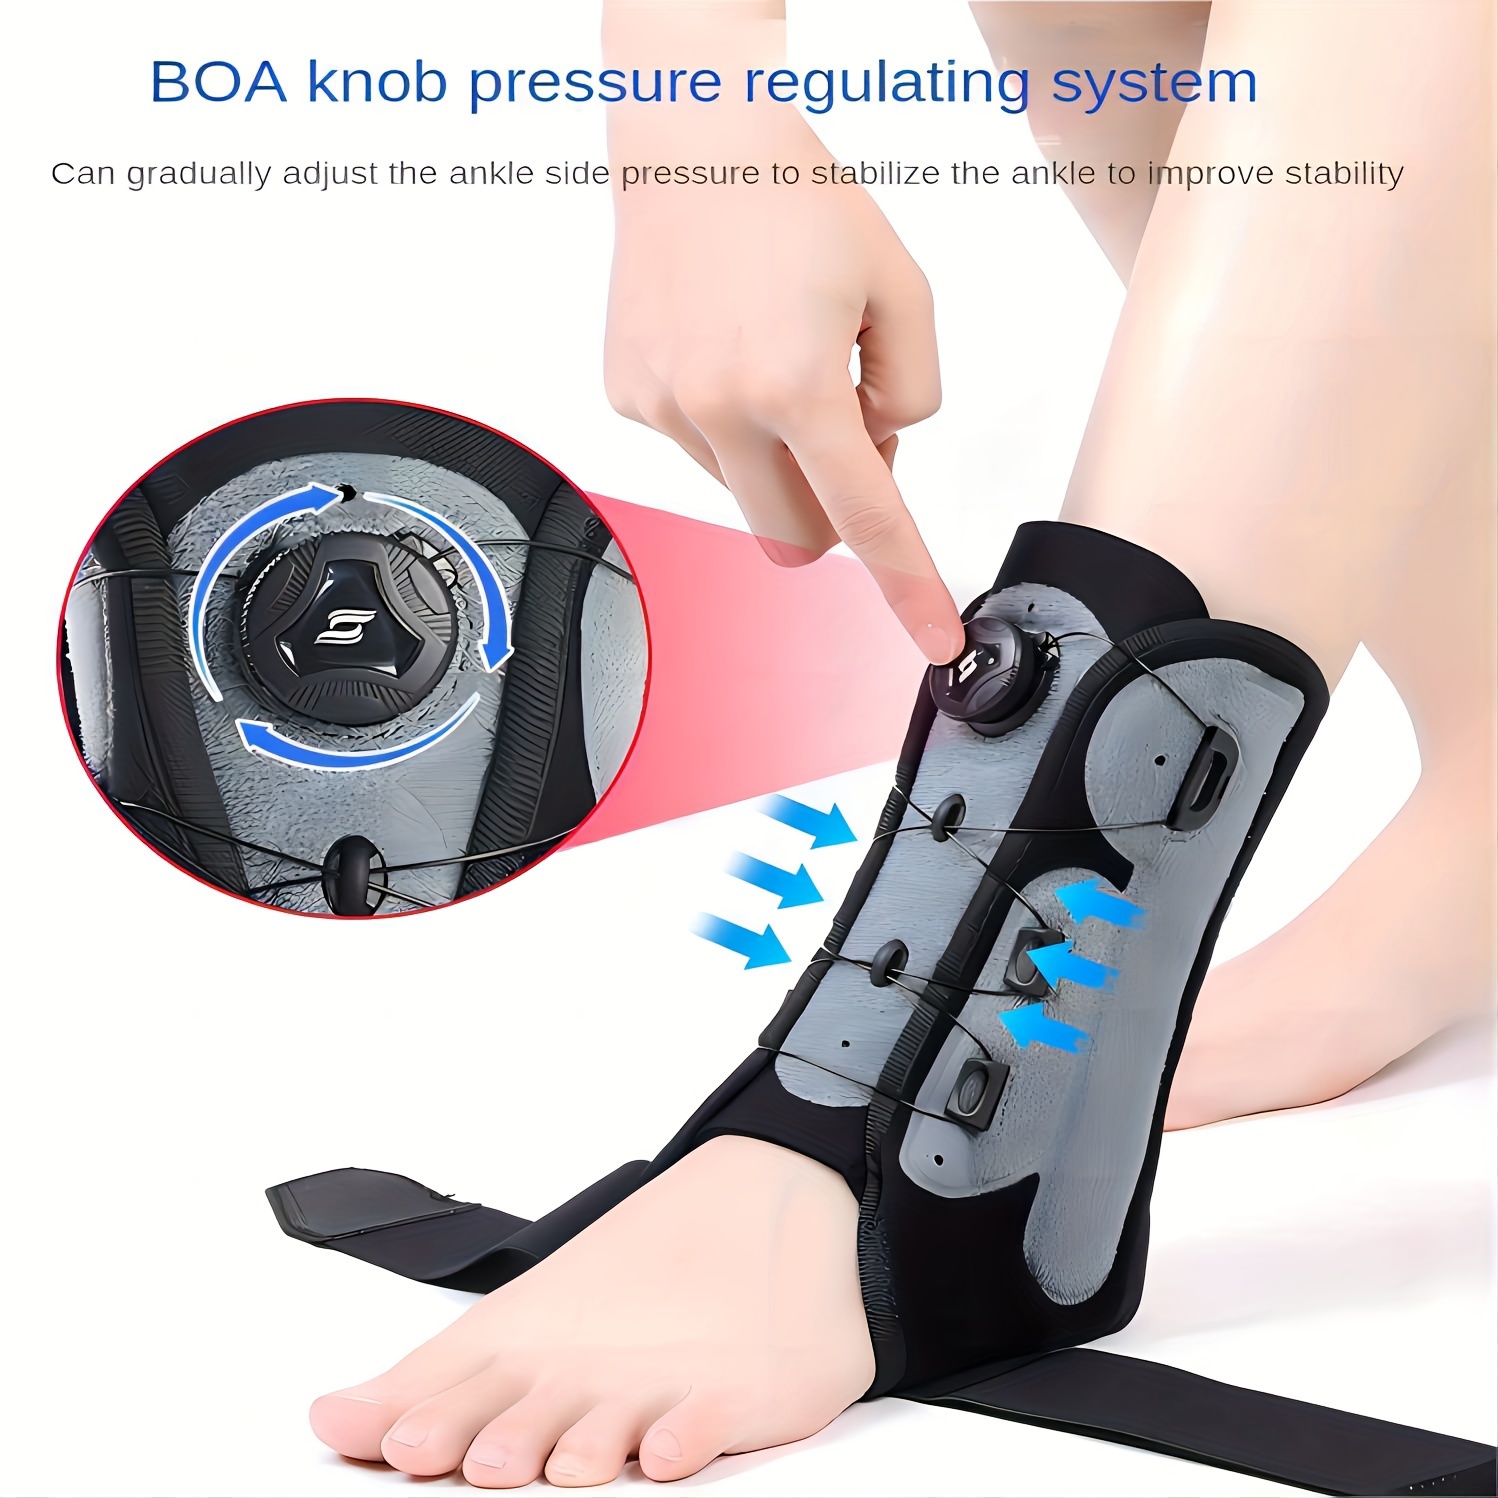 

Adjustable Ankle Brace Support With Boa Knob, 4 Spring Stabilizers For Sprain Protection And Post-plaster Recovery, Sports Ankle Guard For Running And Stability